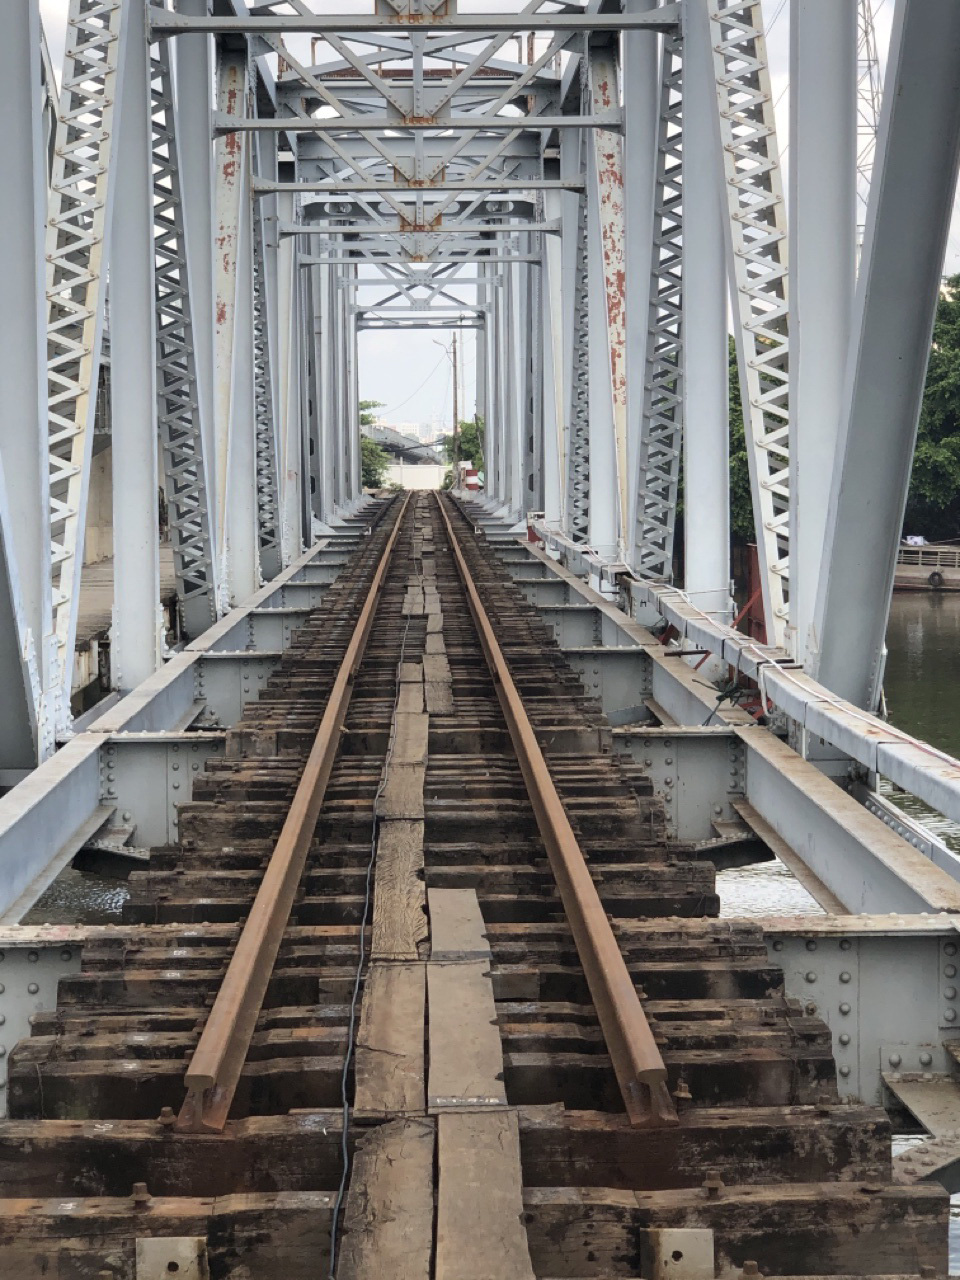 Two spans of the old Binh Loi Railway Bridge will be kept intact for preservation. Photo: H.TK / Tuoi Tre